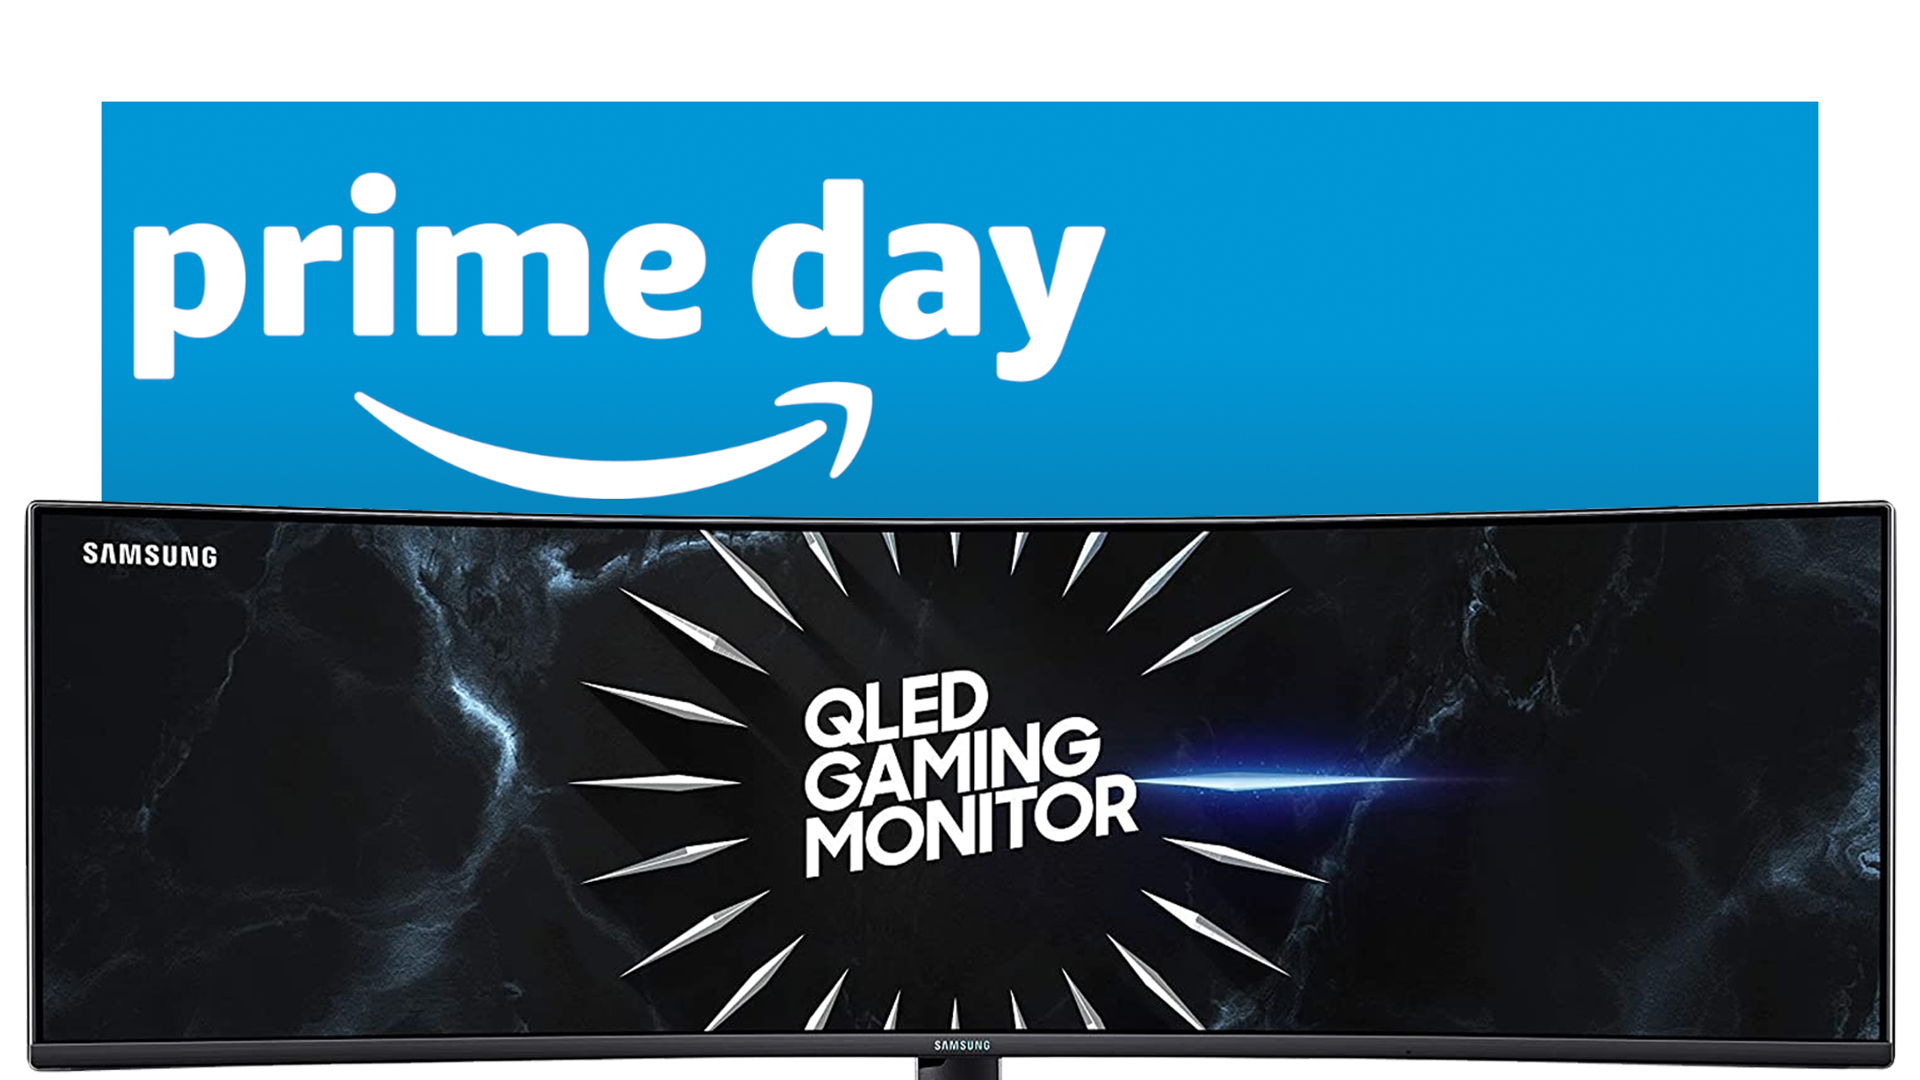  My dream monitor is cheaper now for Prime Day than it was on Black Friday 